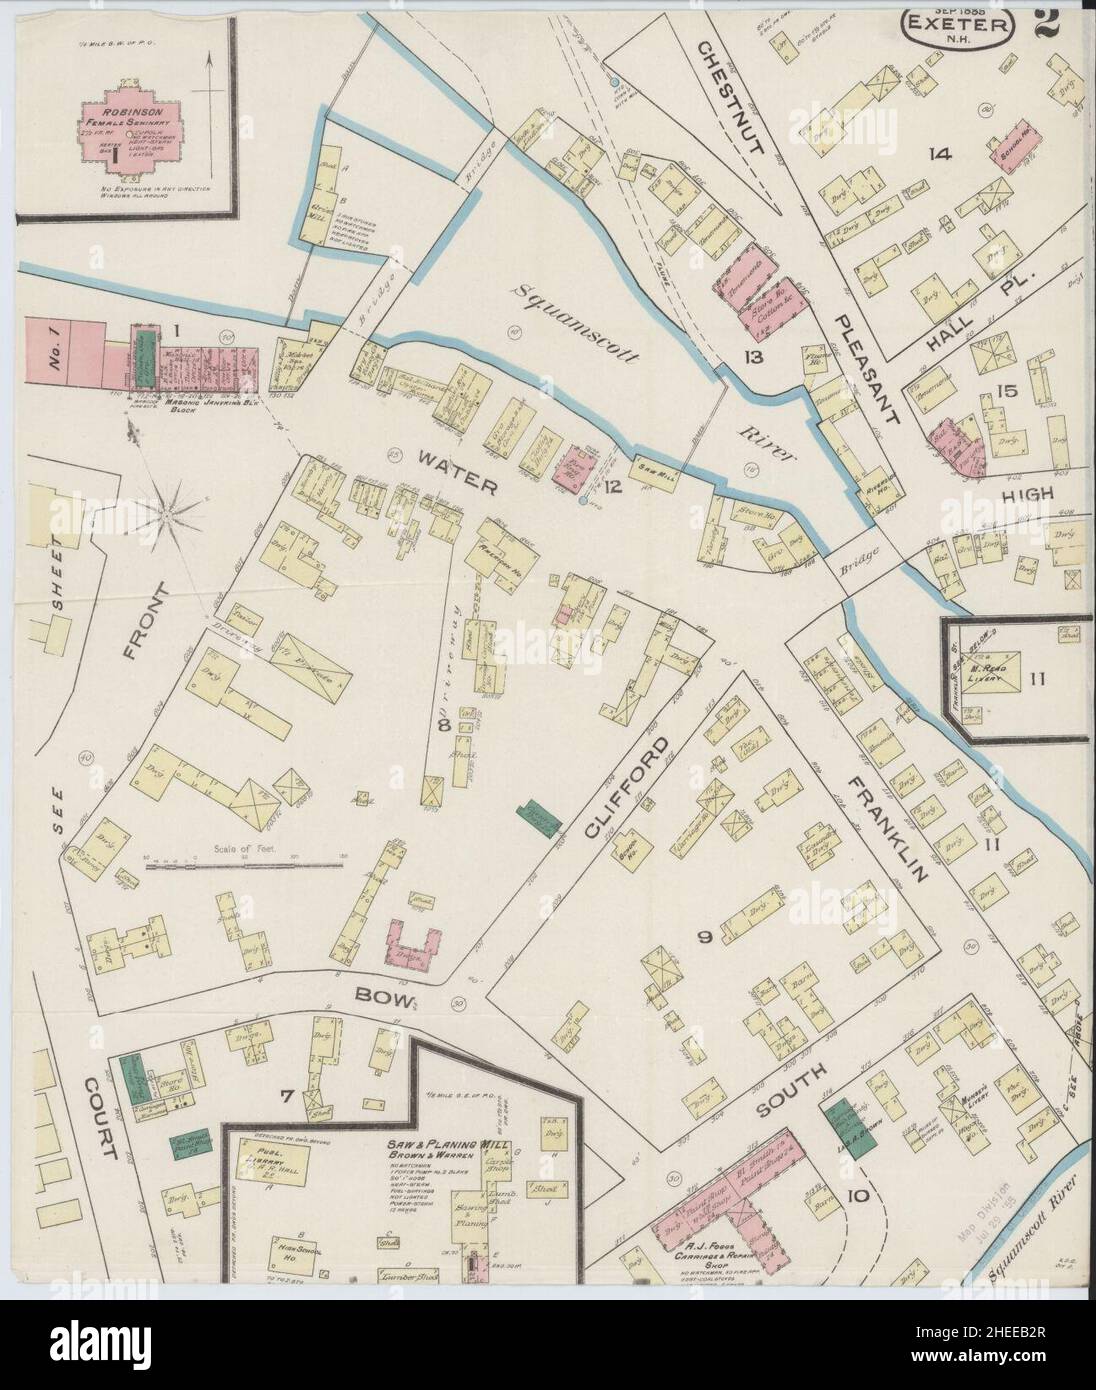 Sanborn Fire Insurance Map from Exeter, Rockingham County, New Hampshire. Stock Photo